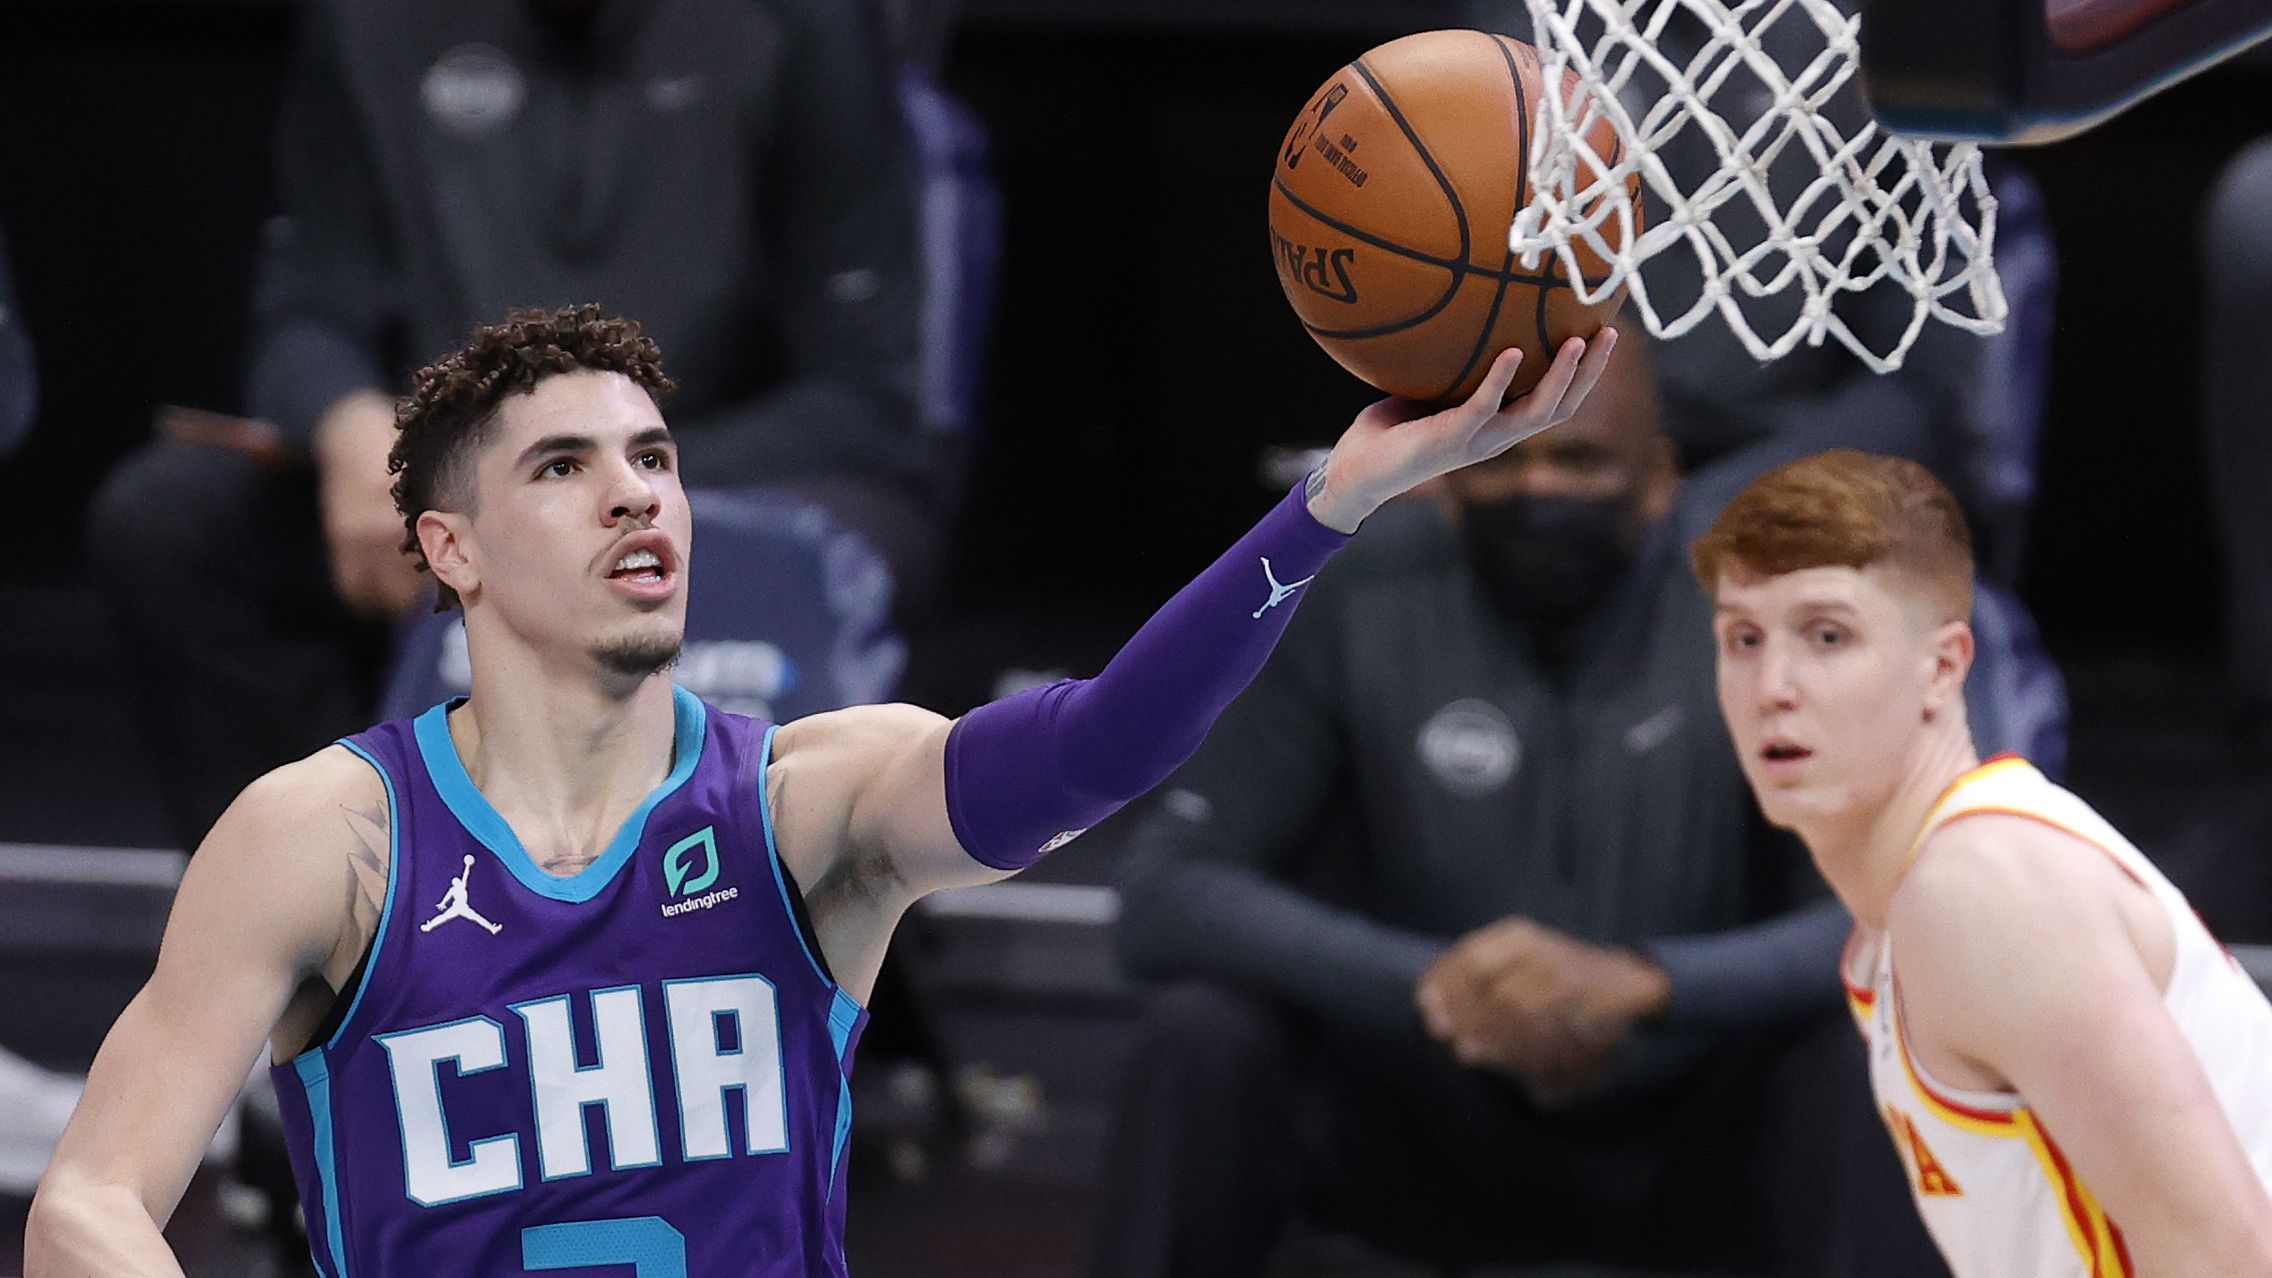 Former Illawarra Hawks star LaMelo Ball becomes the youngest player to record an NBA triple double